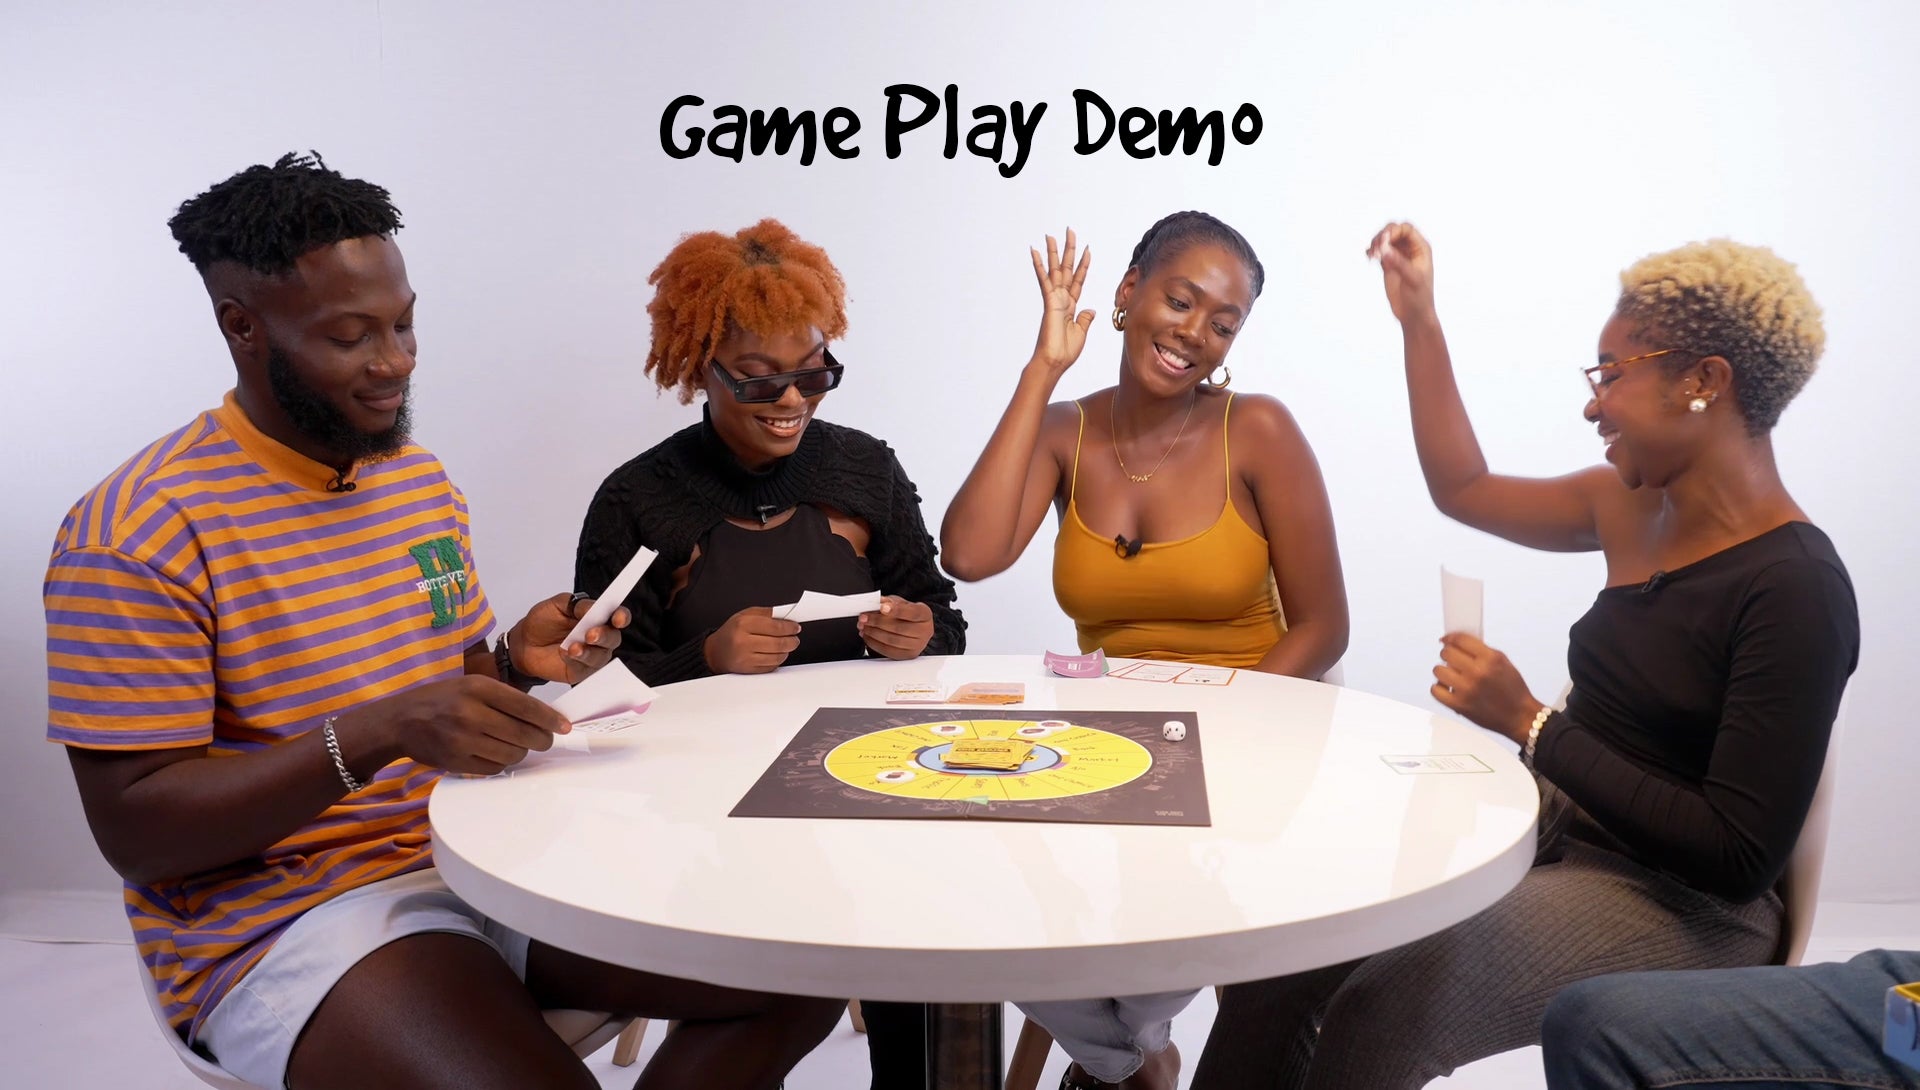 Load video: Game Play Demo